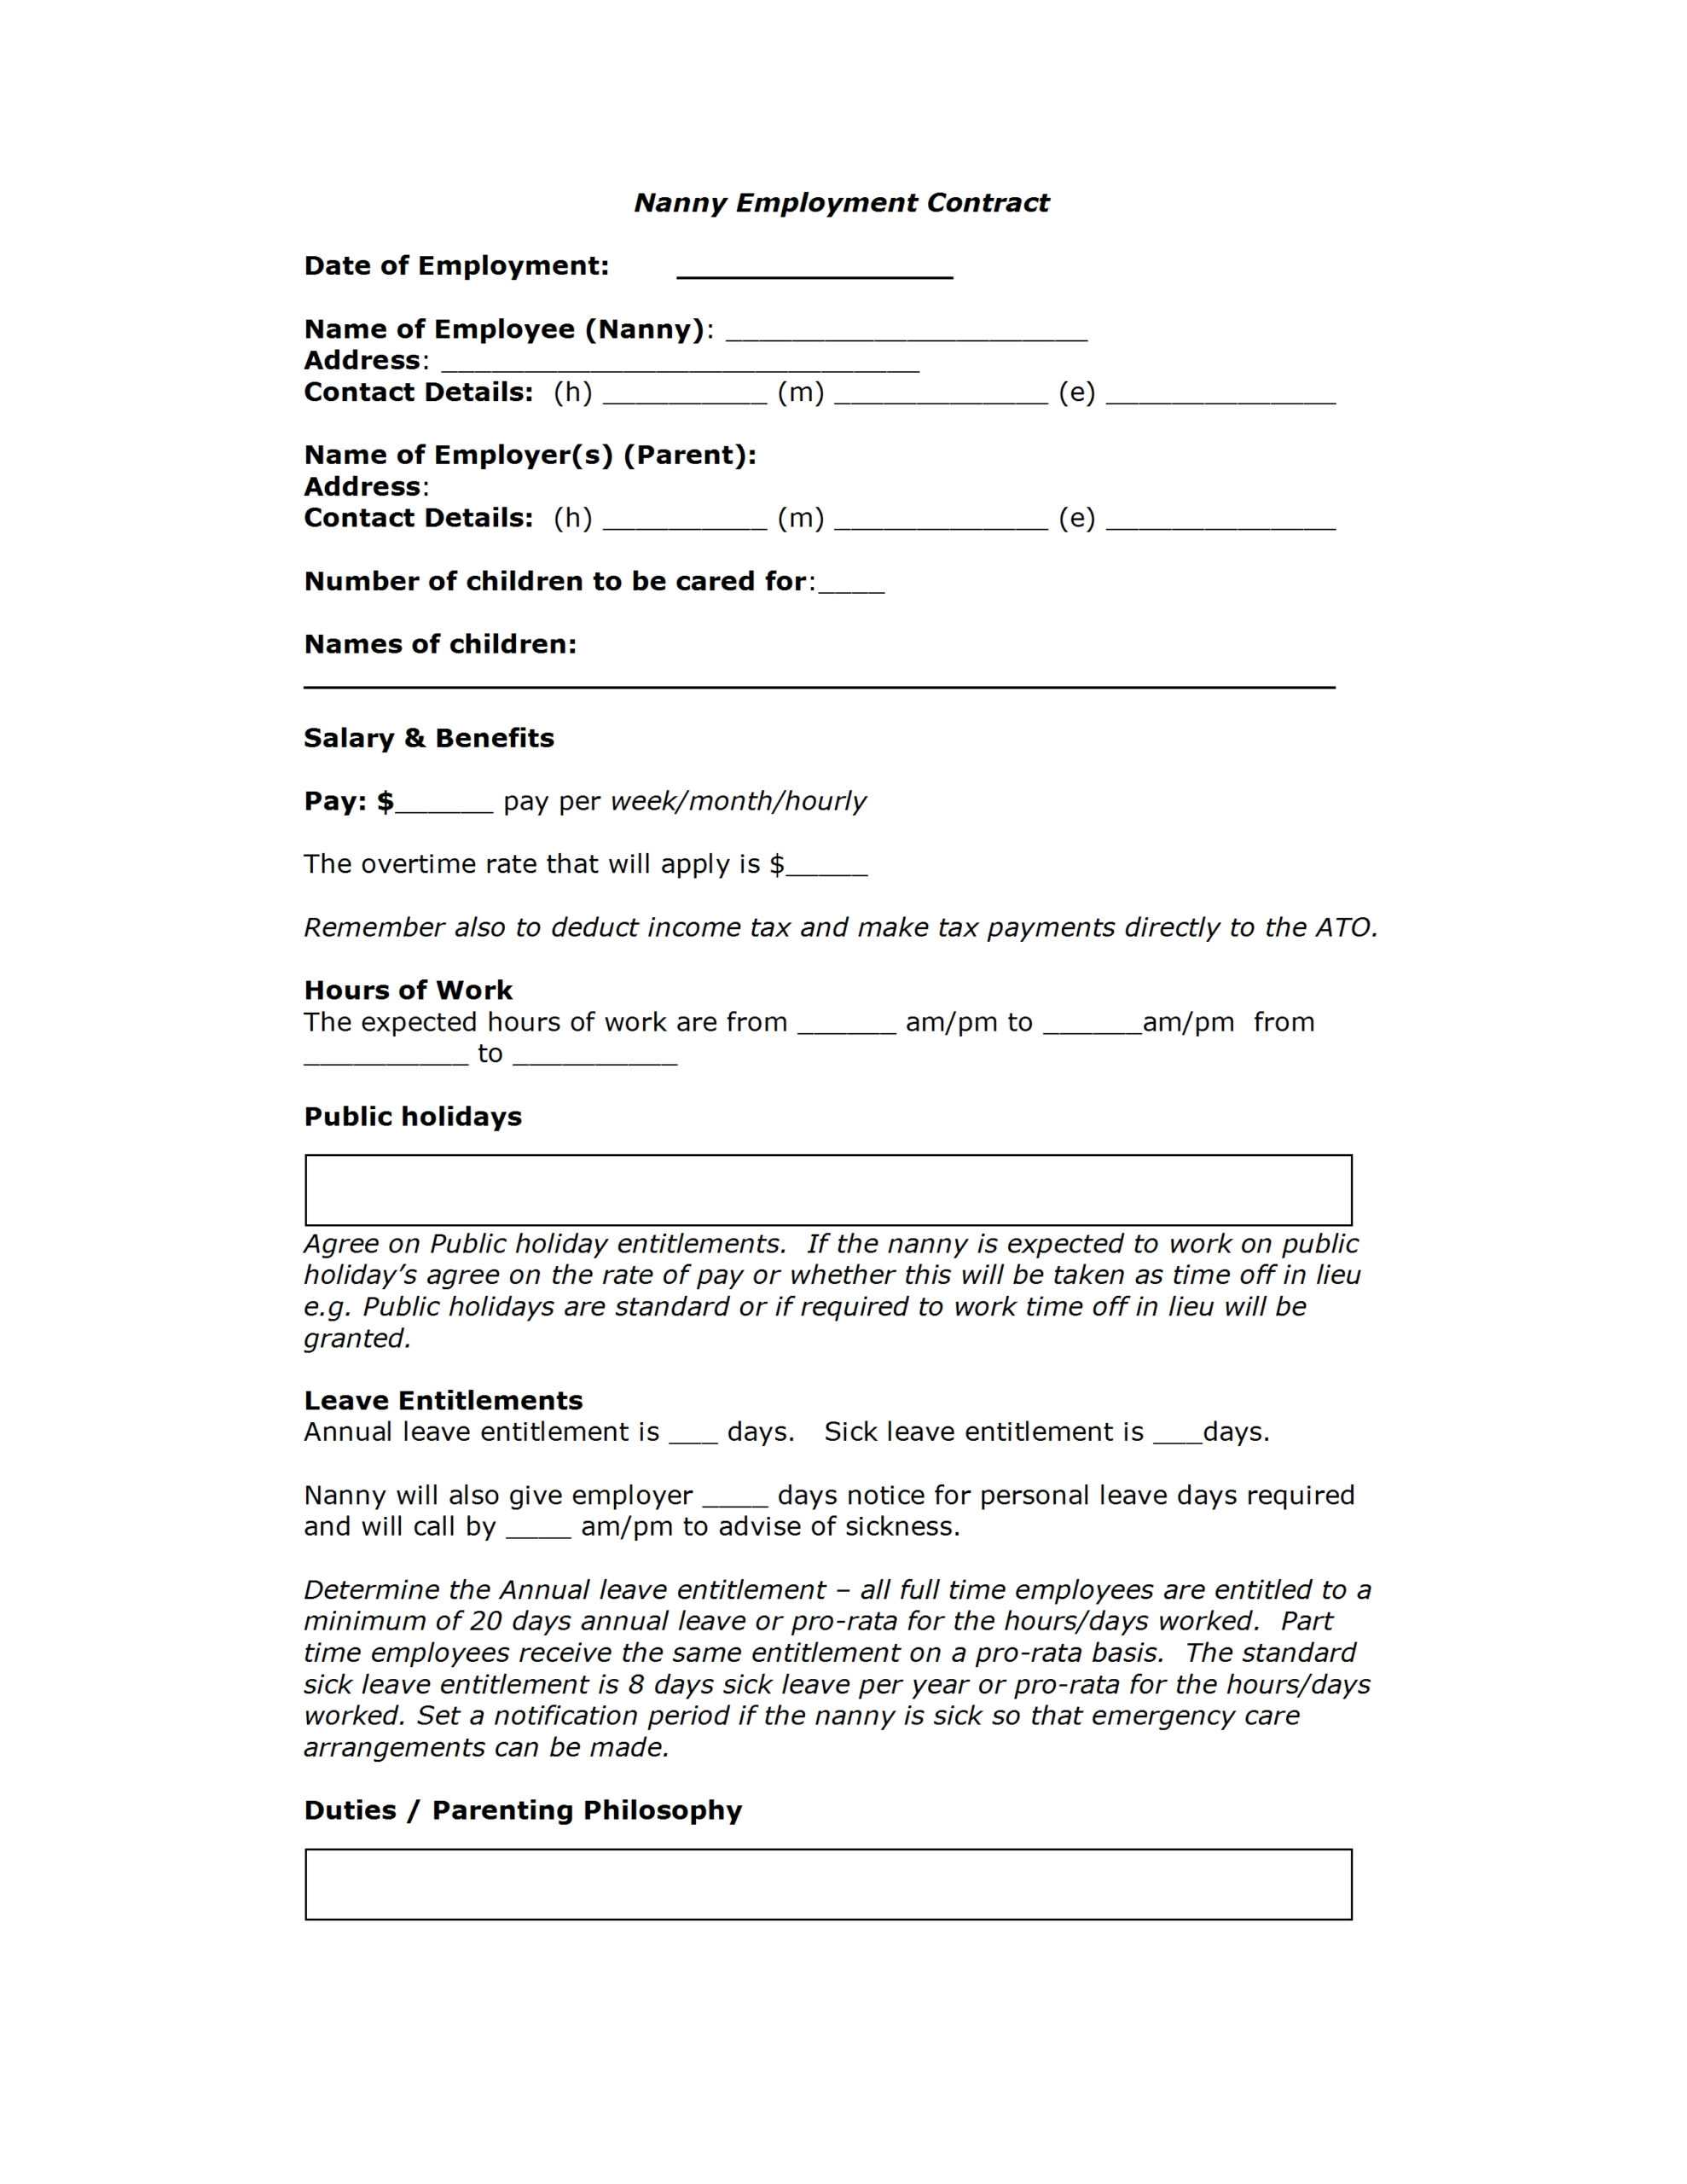 Contract Template For Nanny | Professional Resume Cv Maker Pertaining To Nanny Contract Template Word